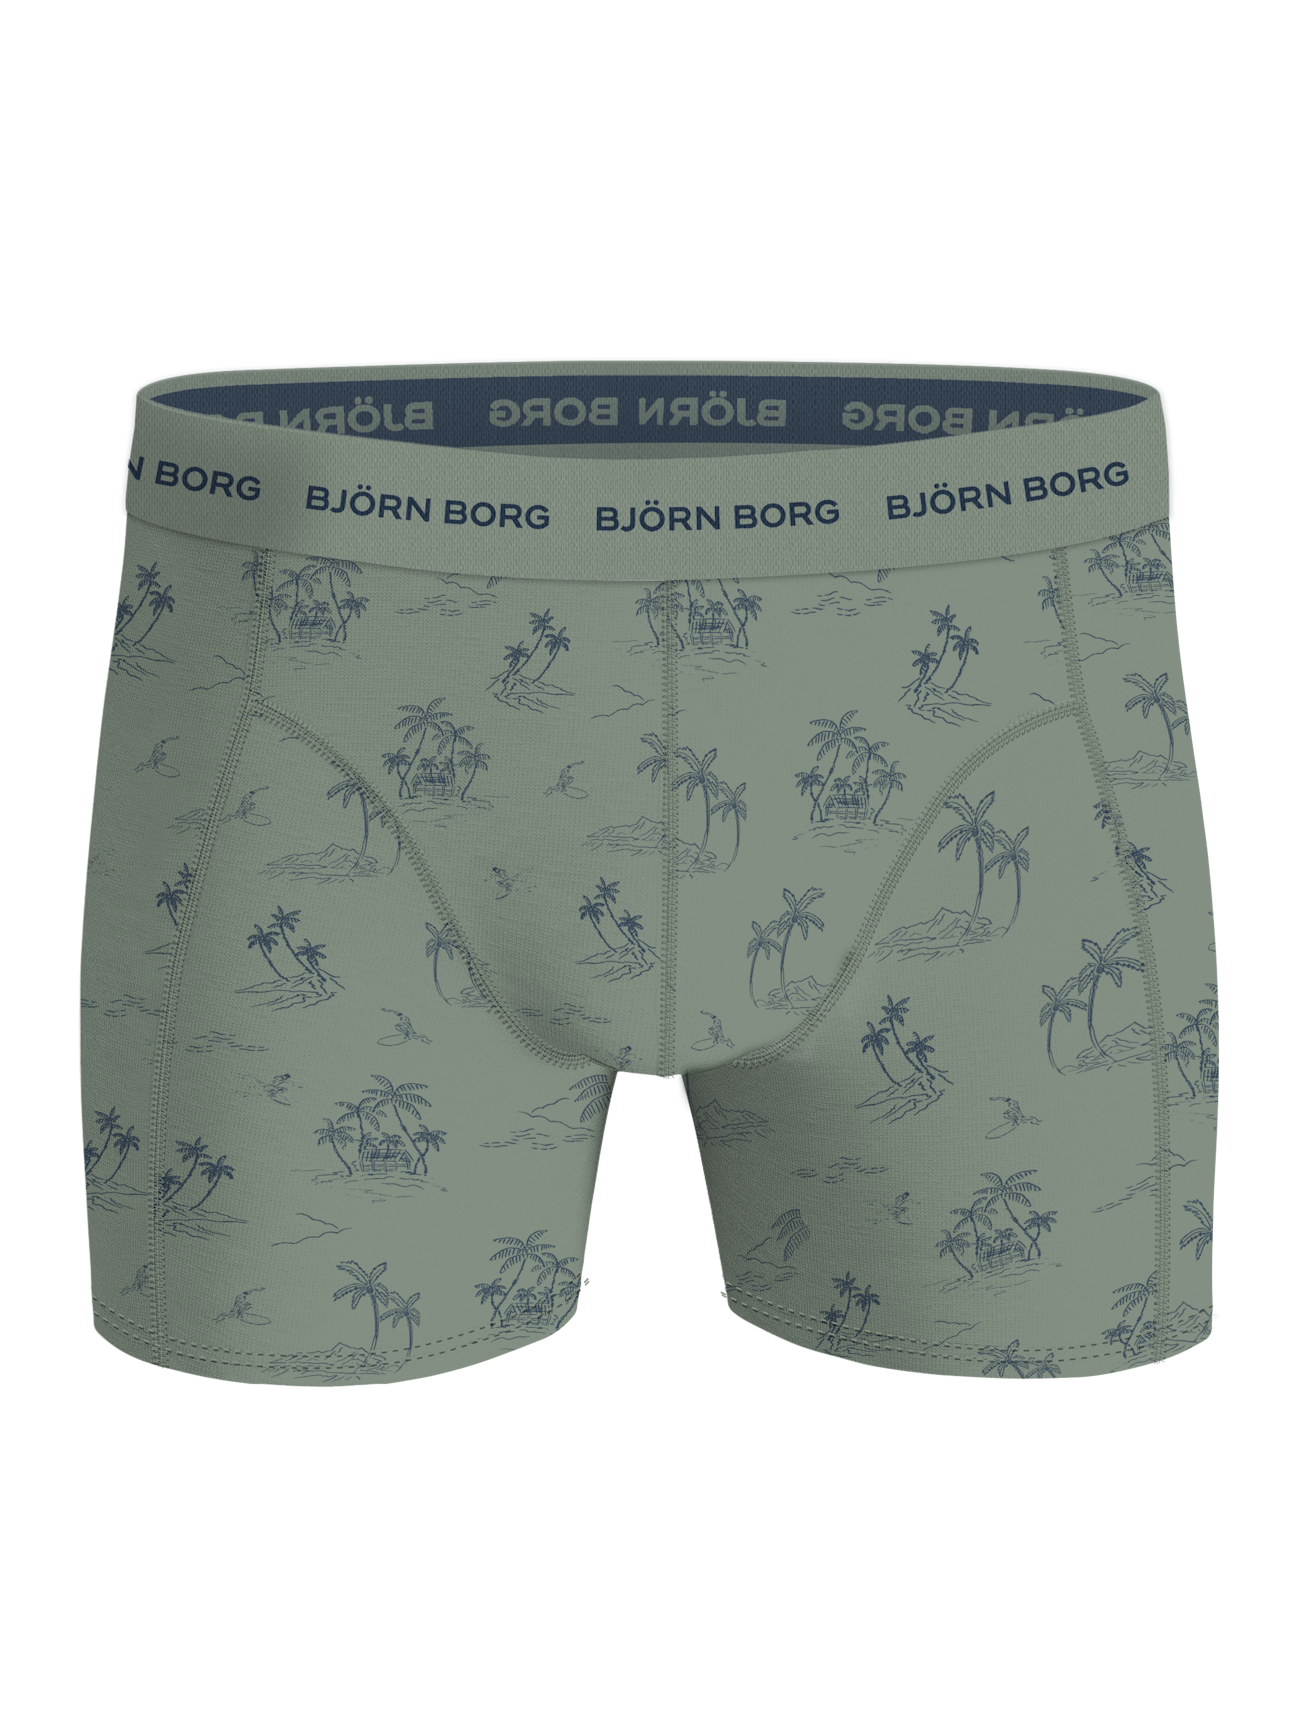 NEXT MENS 100% COTTON Loose Fit Boxers Underwear Pants Trunks 3 Pack £15.95  ONLY